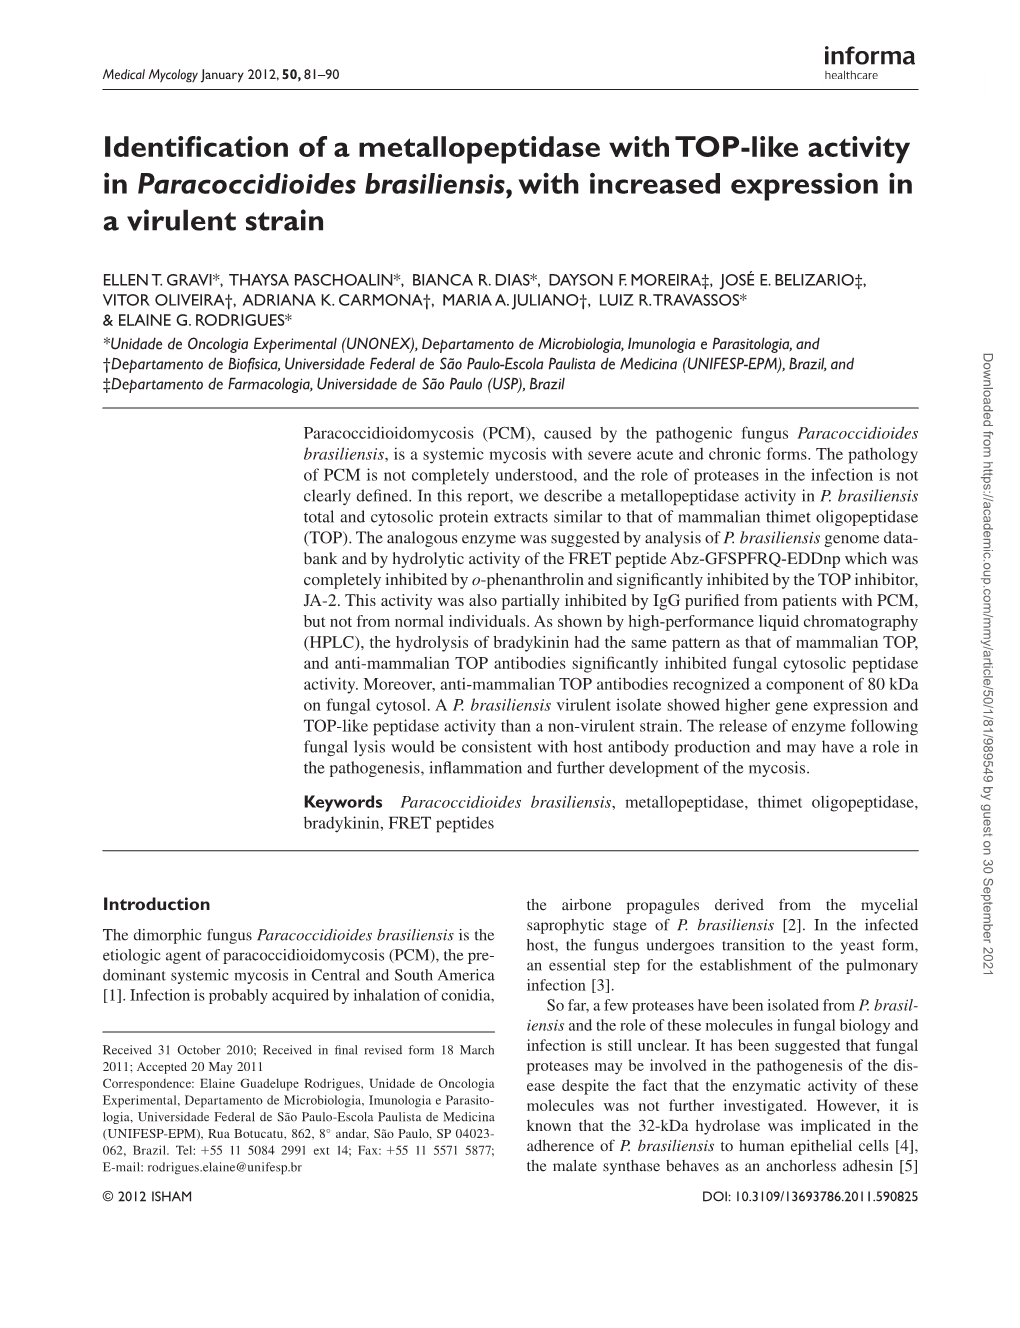 Identification of a Metallopeptidase with TOP-Like Activity in Paracoccidioides Brasiliensis, with Increased Expression in A